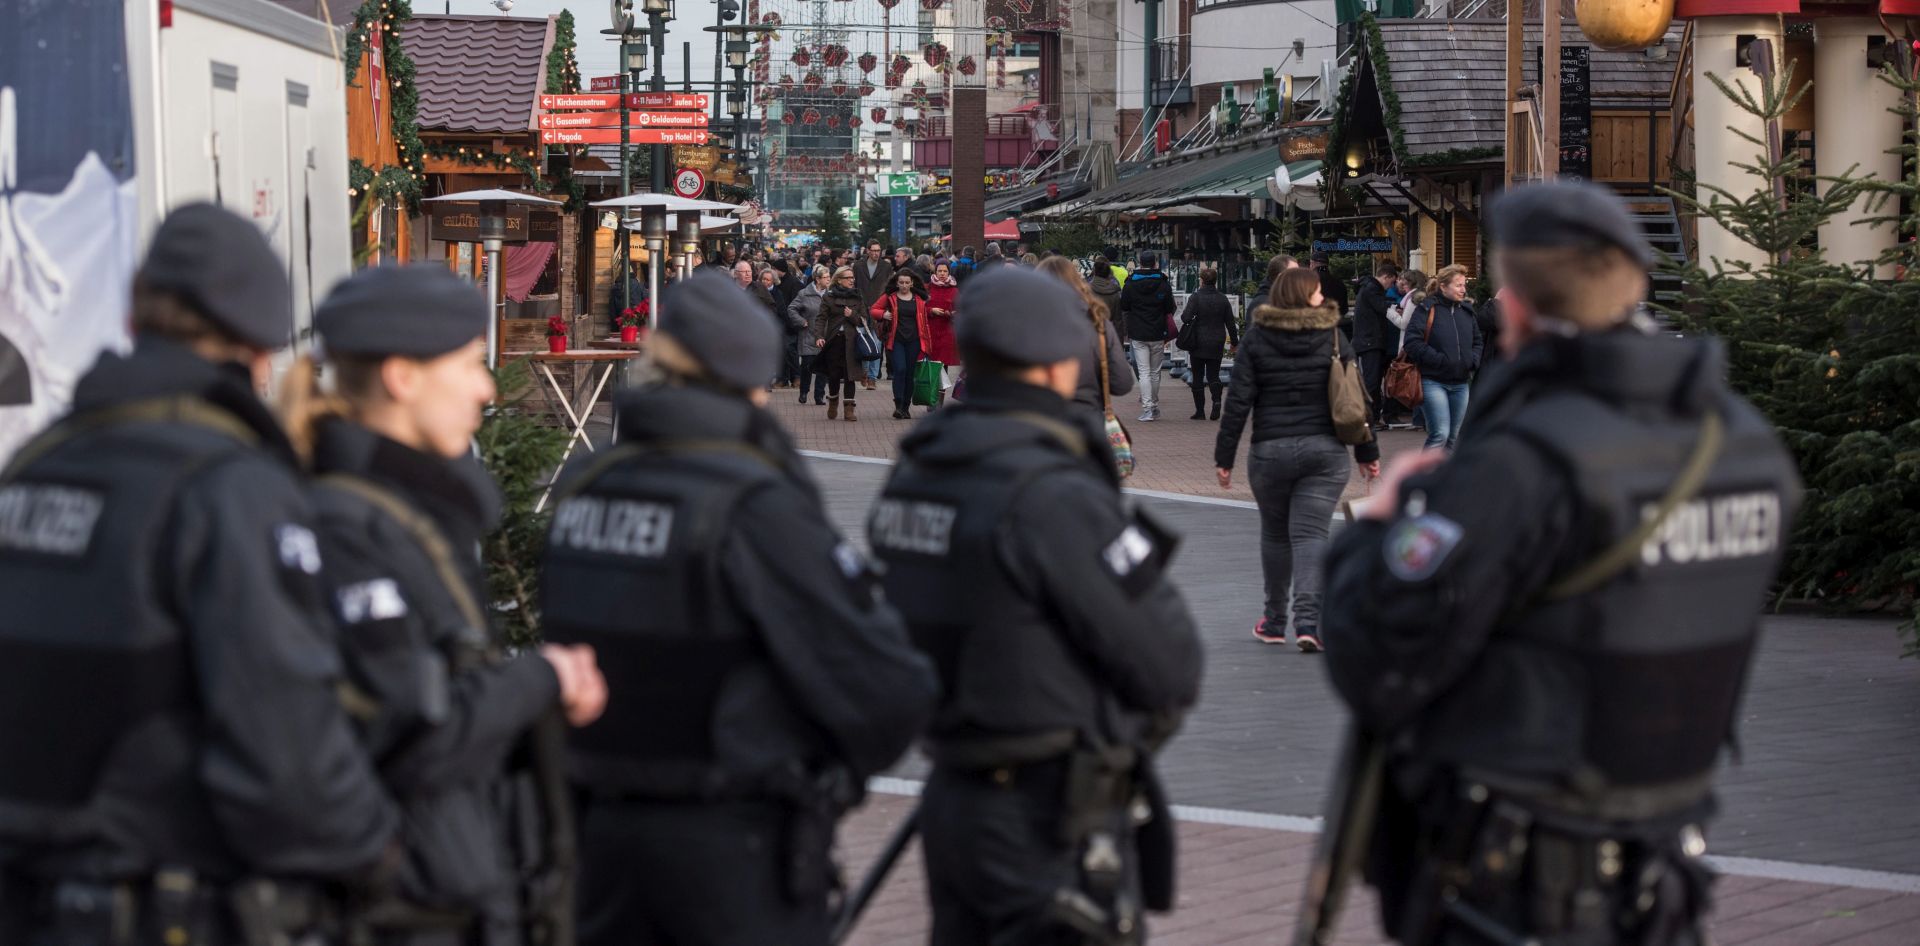 epa05686623 Armed police officers secure the Christmas Market in front of the shopping centre 'Centro' in Oberhausen, Germany, 23 December 2016. German police said they arrested two men in Duisburg on suspicion of preparing a possible attack on a shopping center. The two brothers, 28 and 31, originally from Kosovo, were suspected of planning an attack on the Centro shopping mall in Oberhausen, near the Dutch border, media reported.  EPA/BERND THISSEN